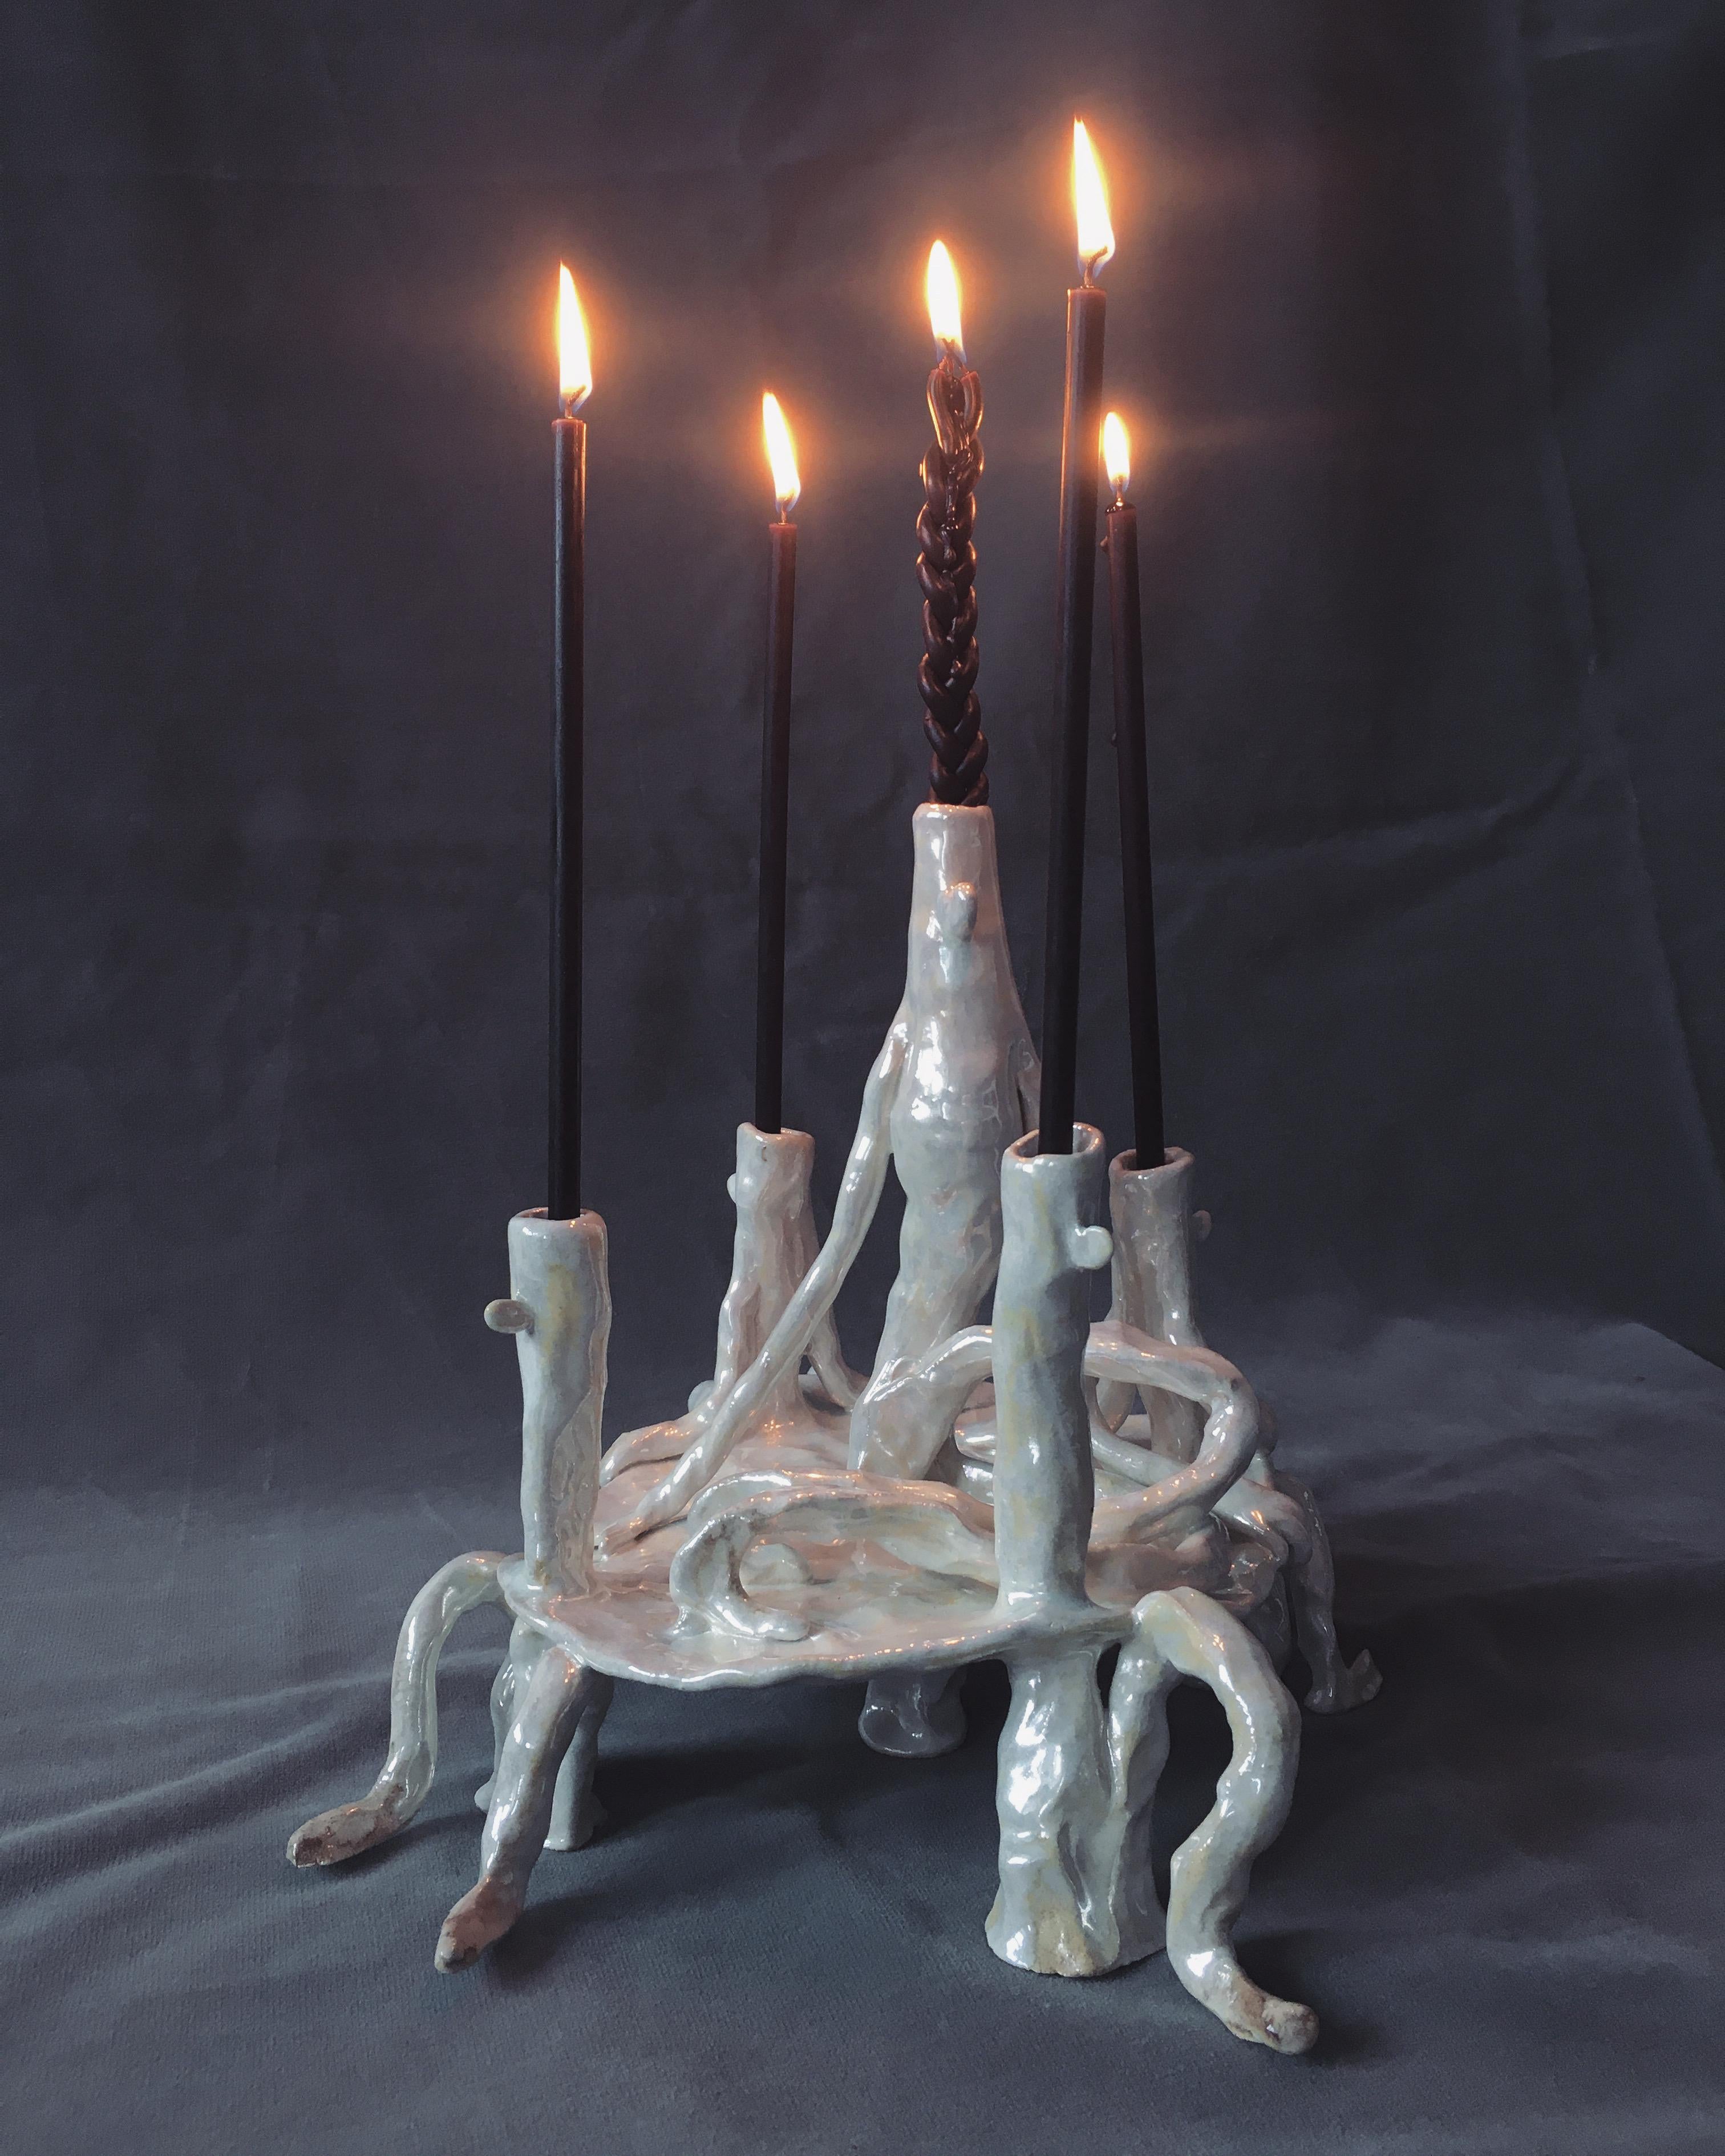 Pearl candle holder by Ana Botezatu.
Dimensions: D 26.5 x W 21 x H 22 cm.
Materials: glazed earthenware.

Ana Botezatu (b. 1982, Bra?ov (former Kronstadt), Romania) lives and works in Berlin. She works with ceramics, drawing, book illustration,